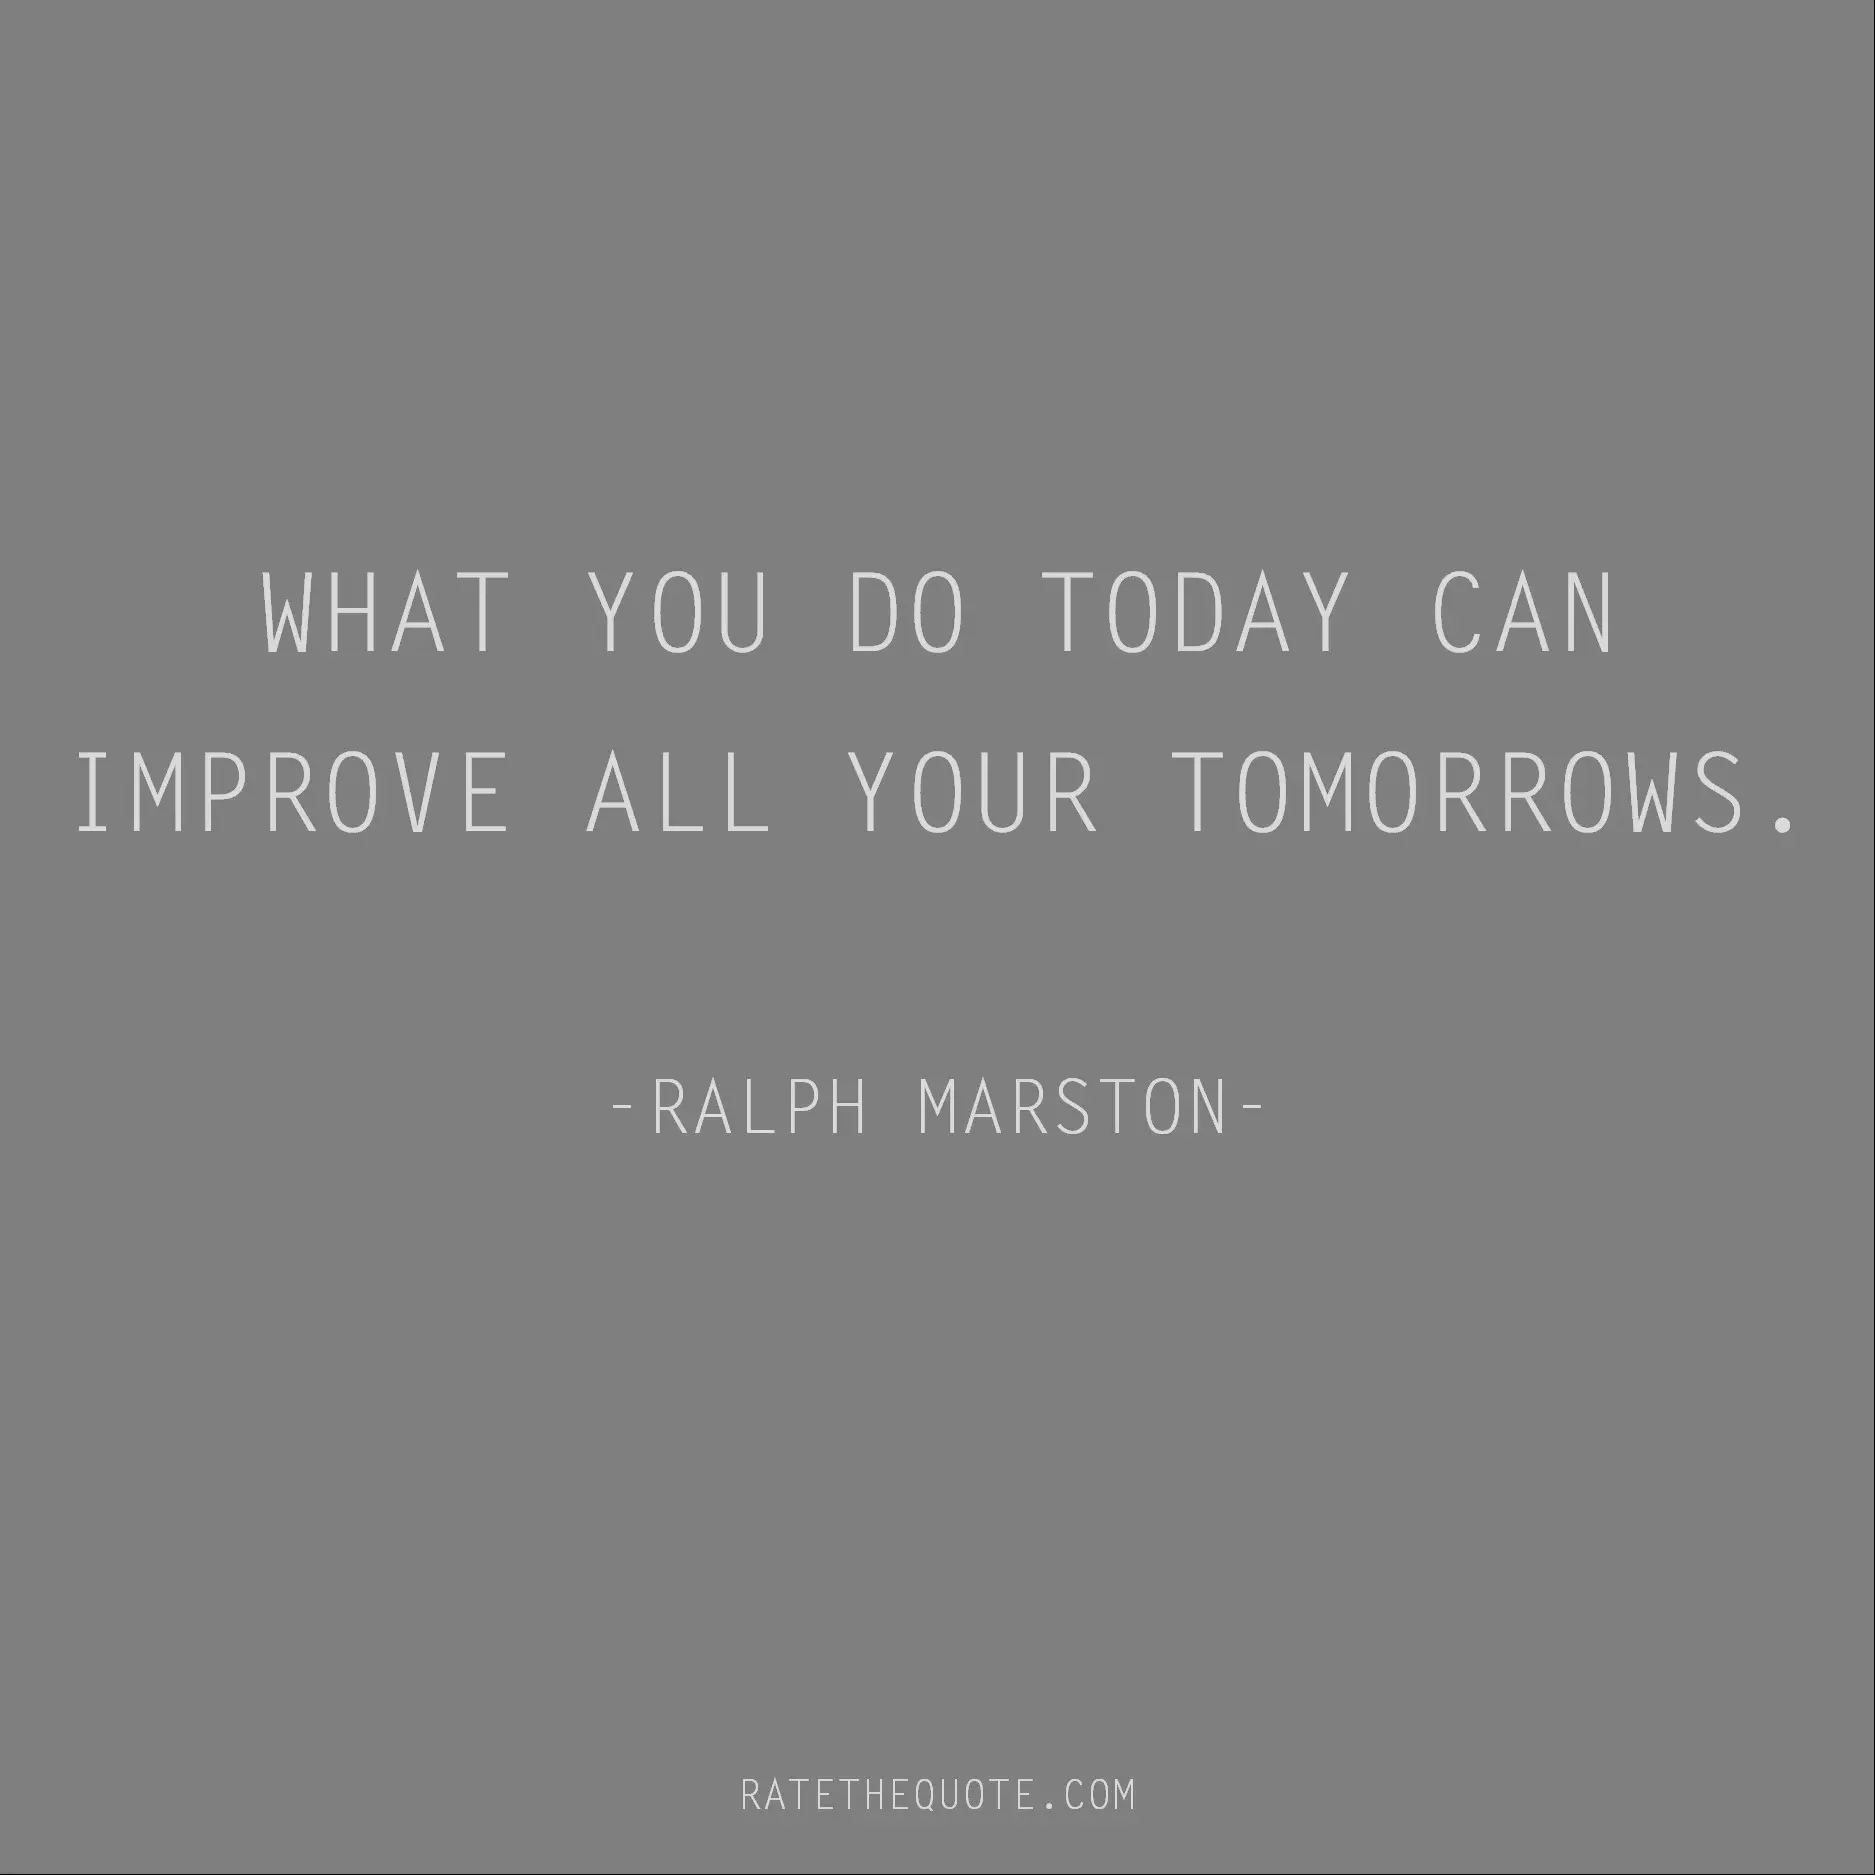 Motivational Quotes WHAT YOU DO TODAY CAN IMPROVE ALL YOUR TOMORROWS. -RALPH MARSTON-